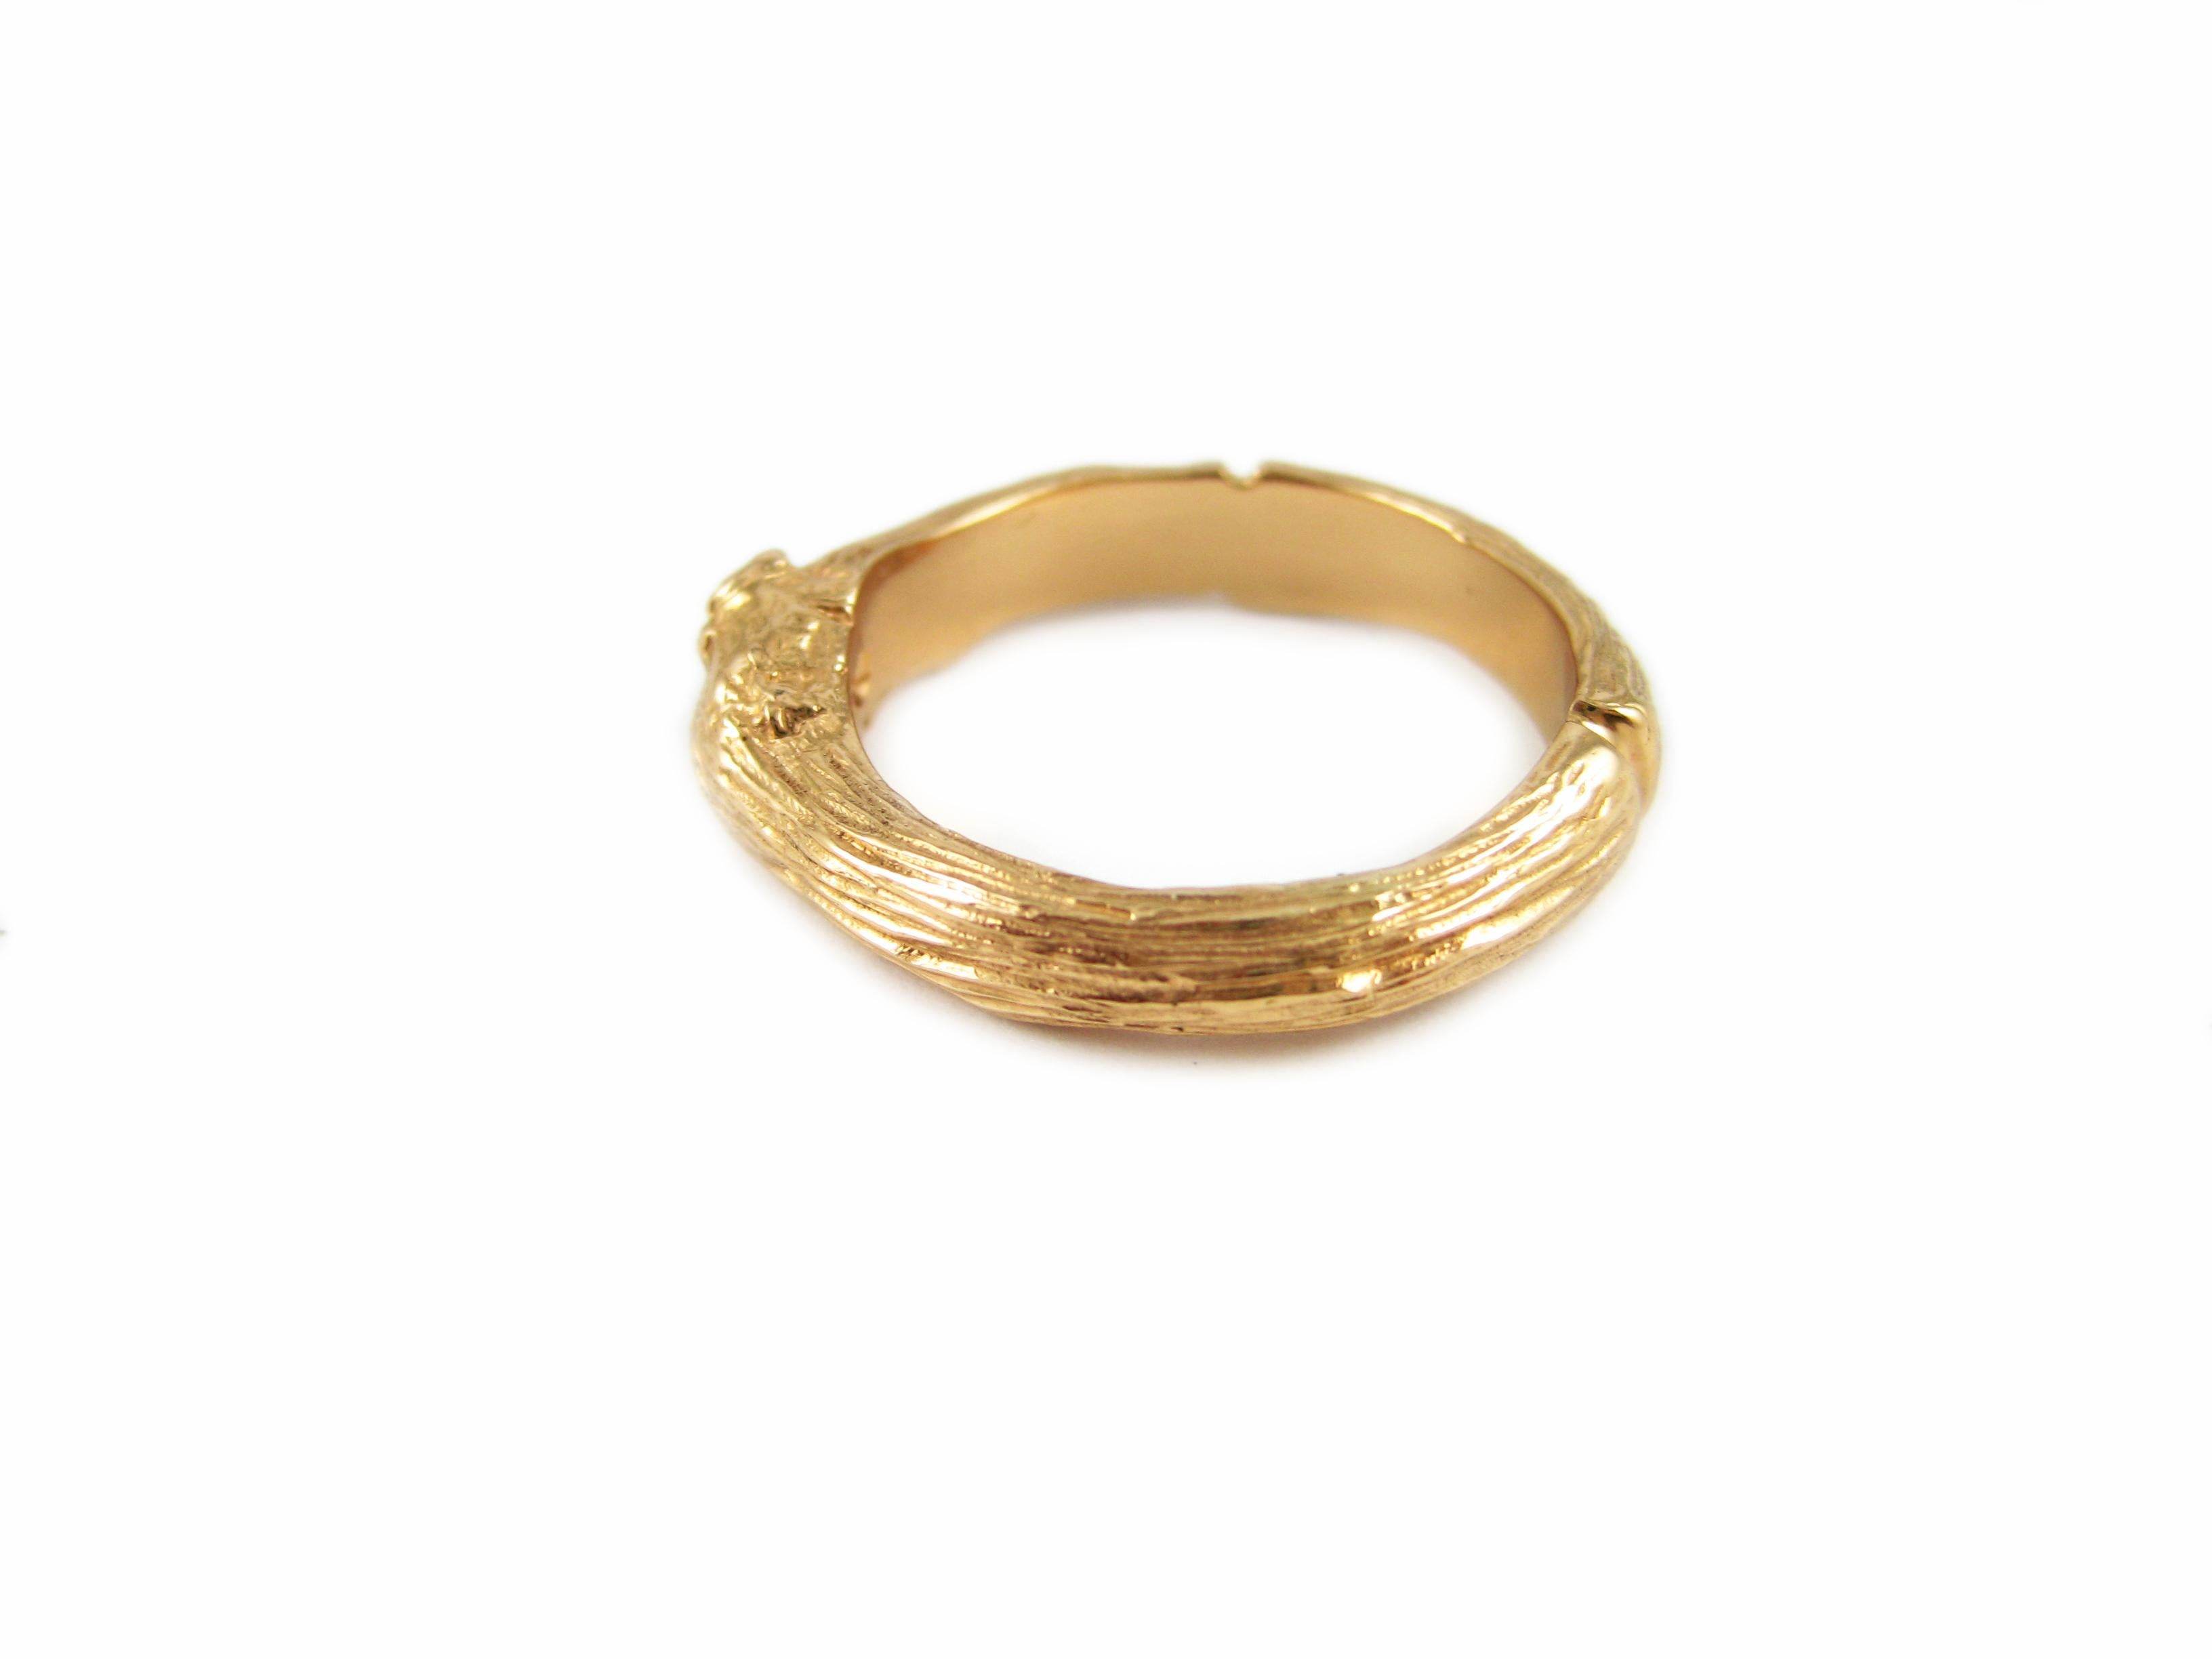 Large Twig Ring in 18k Gold In New Condition For Sale In Solana Beach, CA